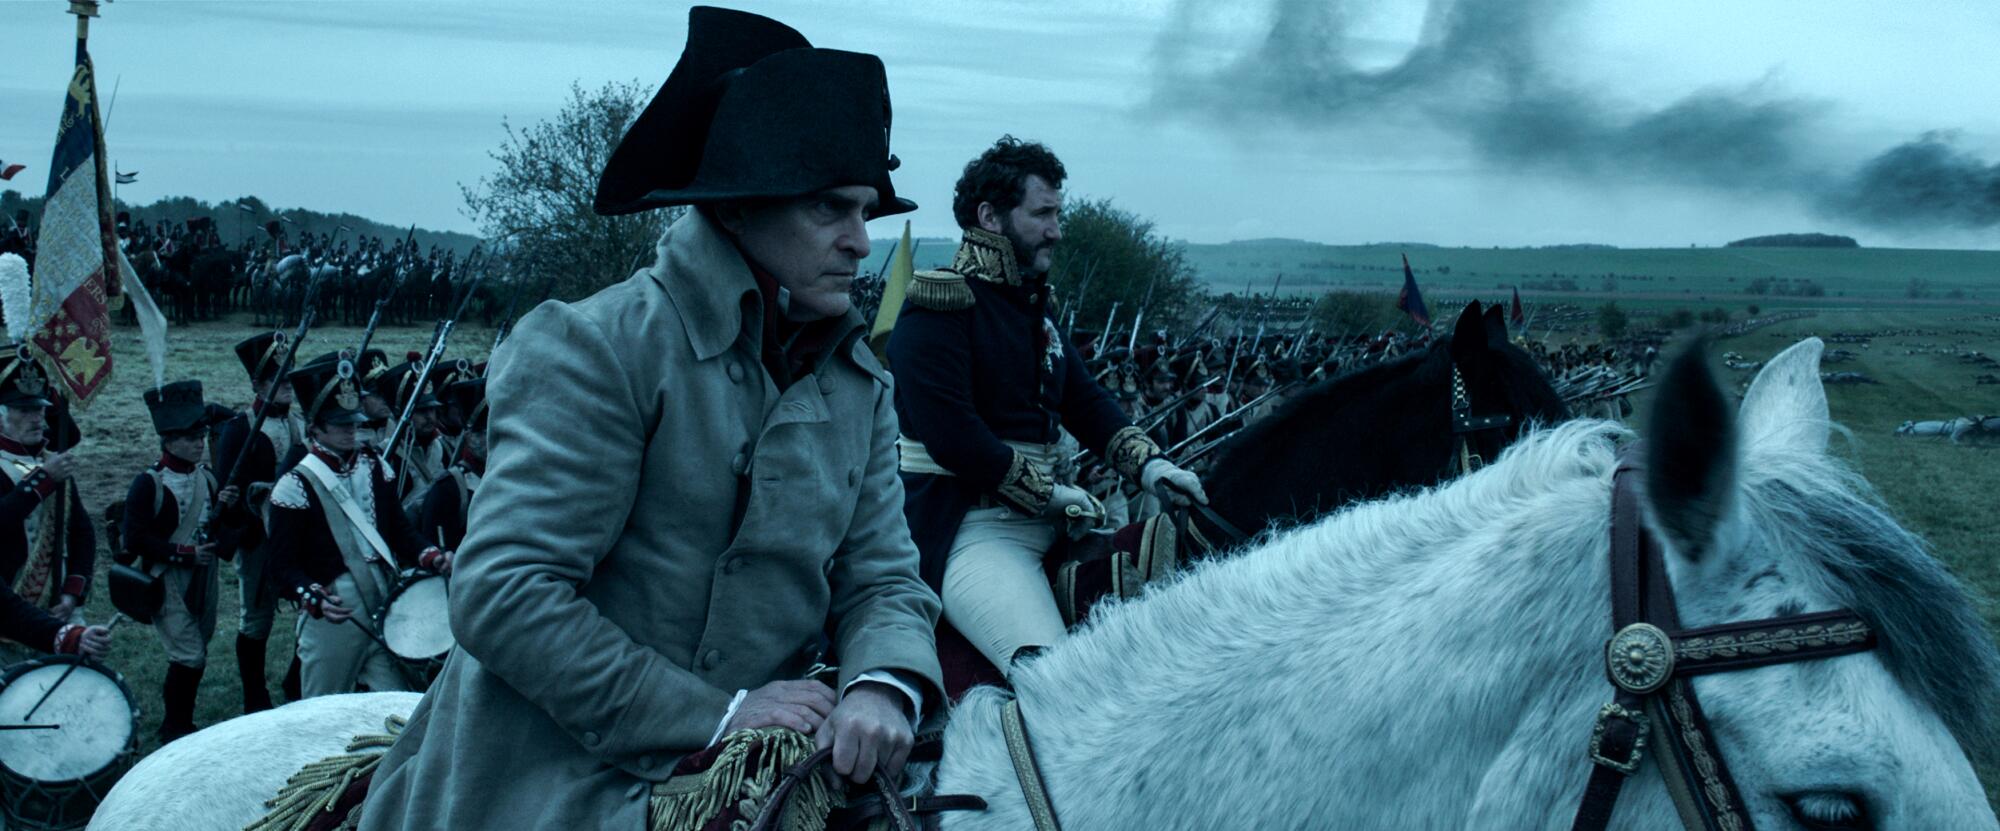 A man sits on a horse, scanning the battlefield.